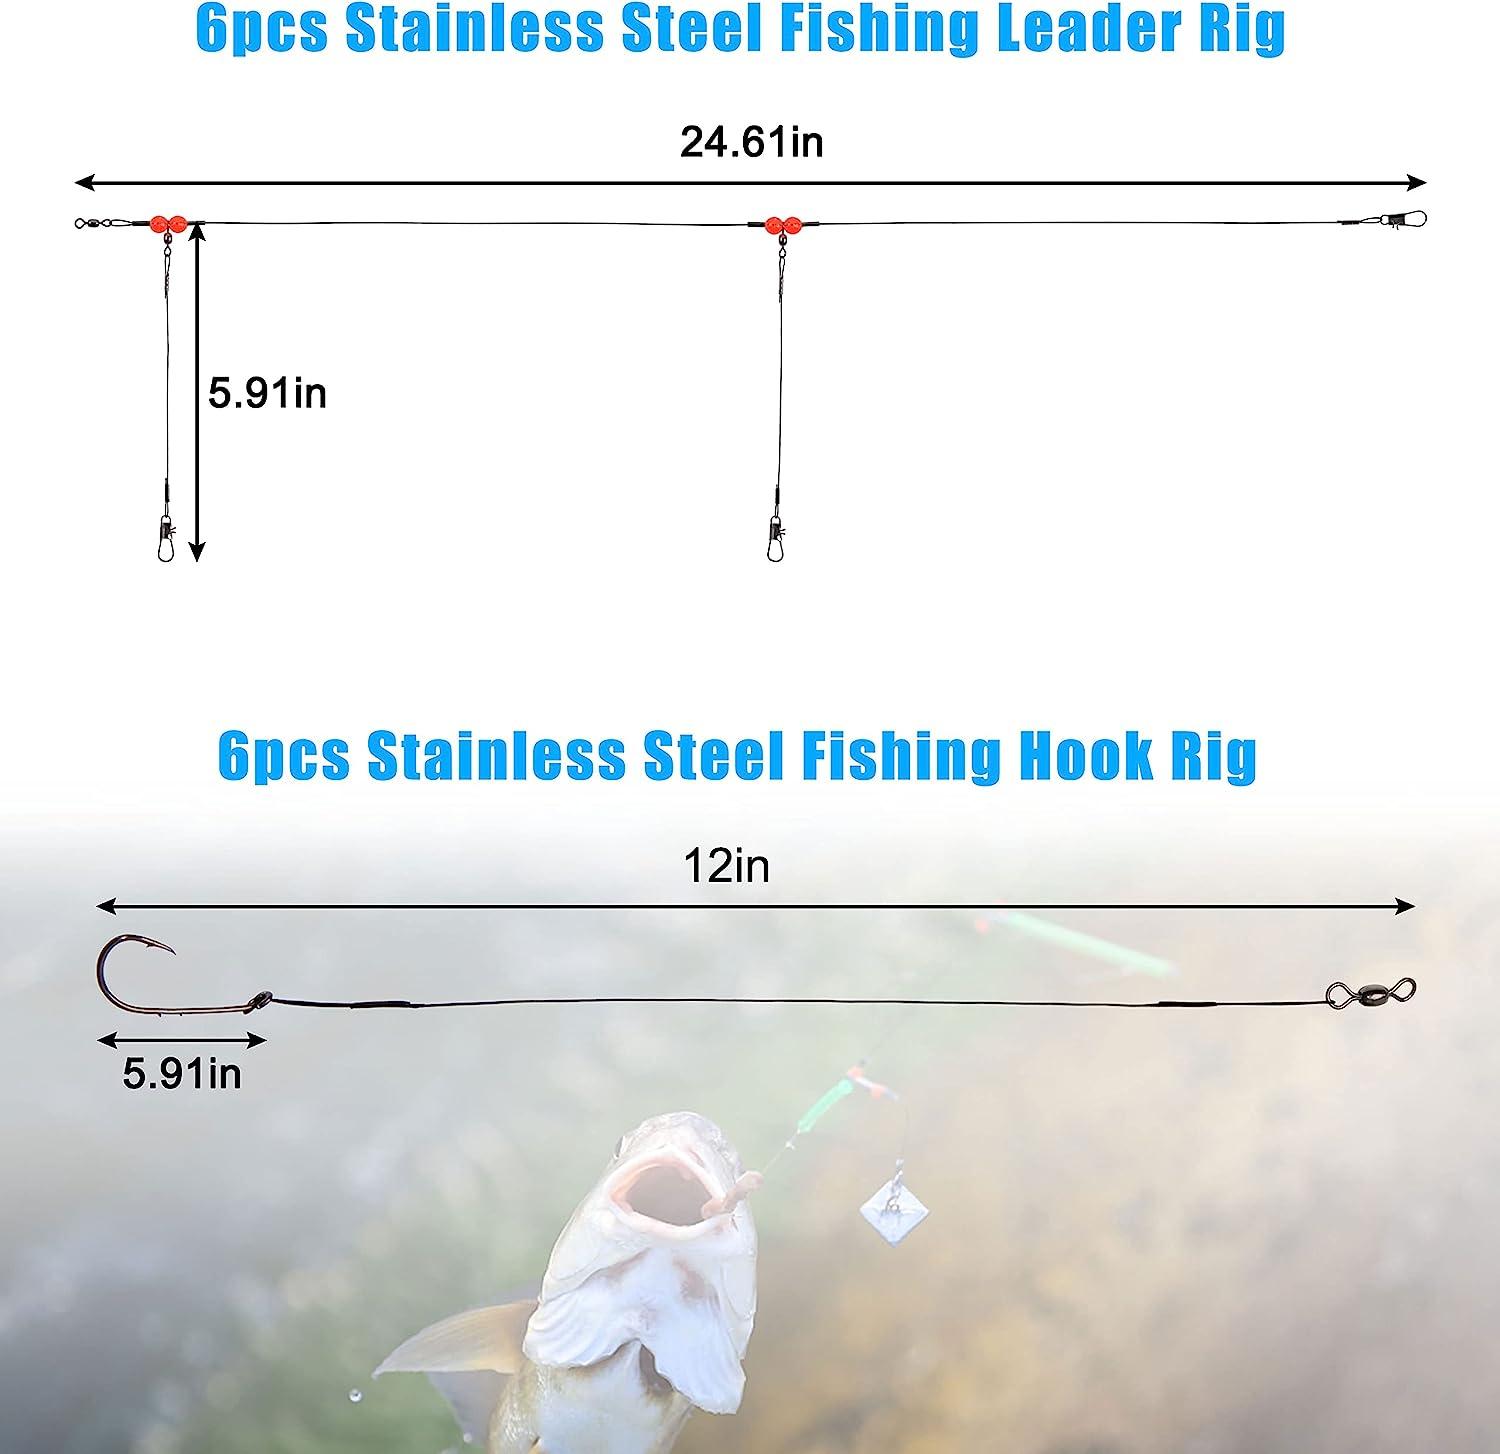 Surf Fishing Tackle Kit Ocean Saltwater Fishing Lures Surf Fishing Gear  Fish Finder Rigs Pompano Rig Pyramid Sinker Weight Fishing Hooks Swivels  Various Accessories